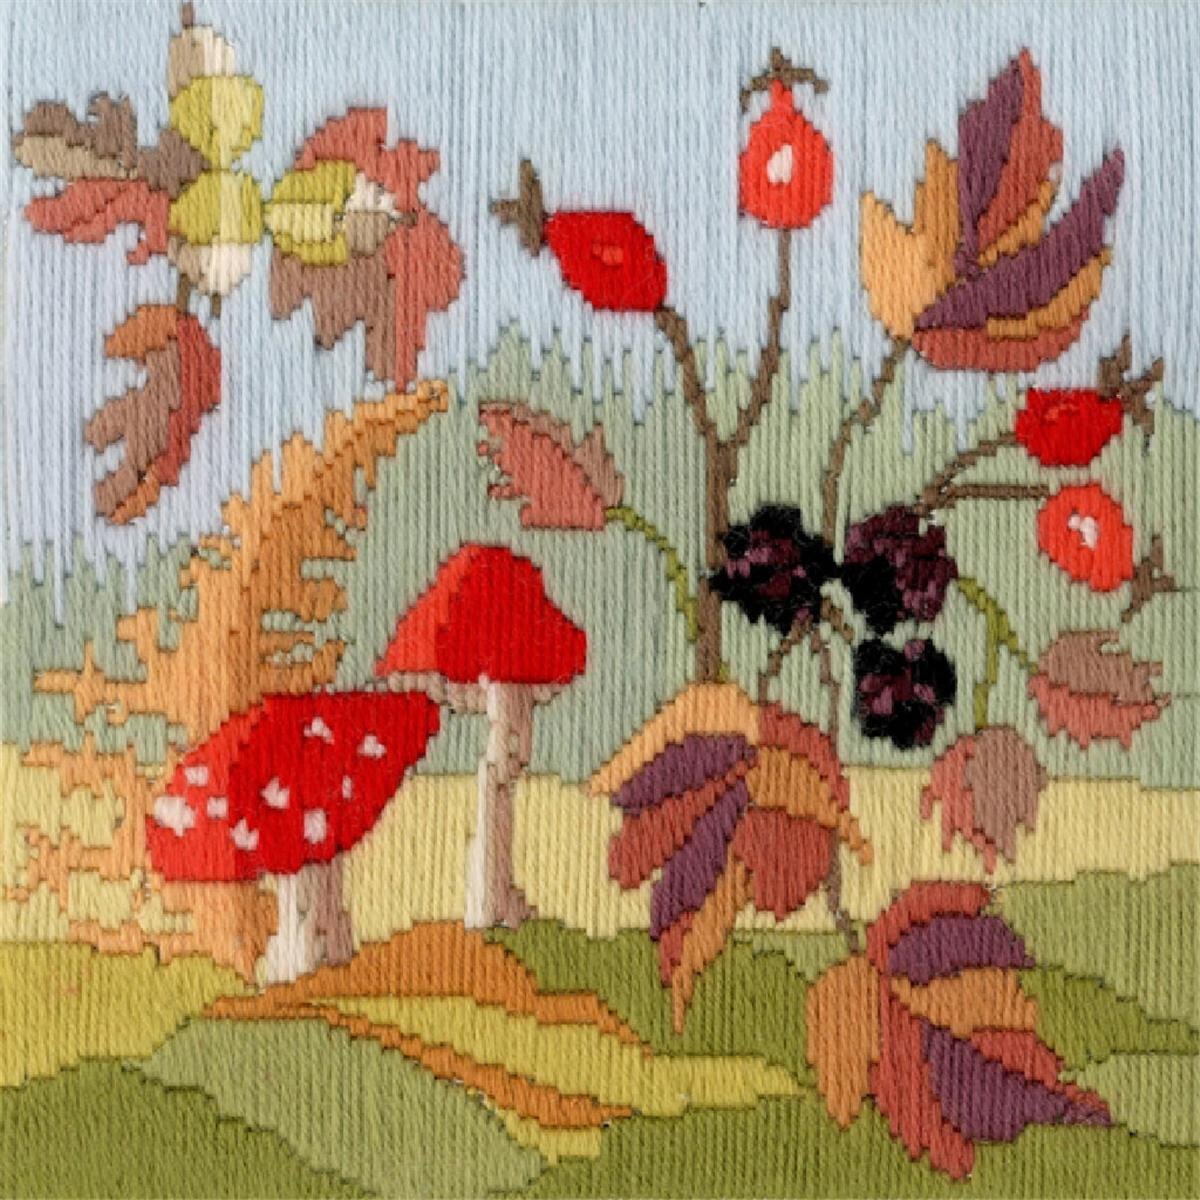 An intricately embroidered forest scene with red-capped...